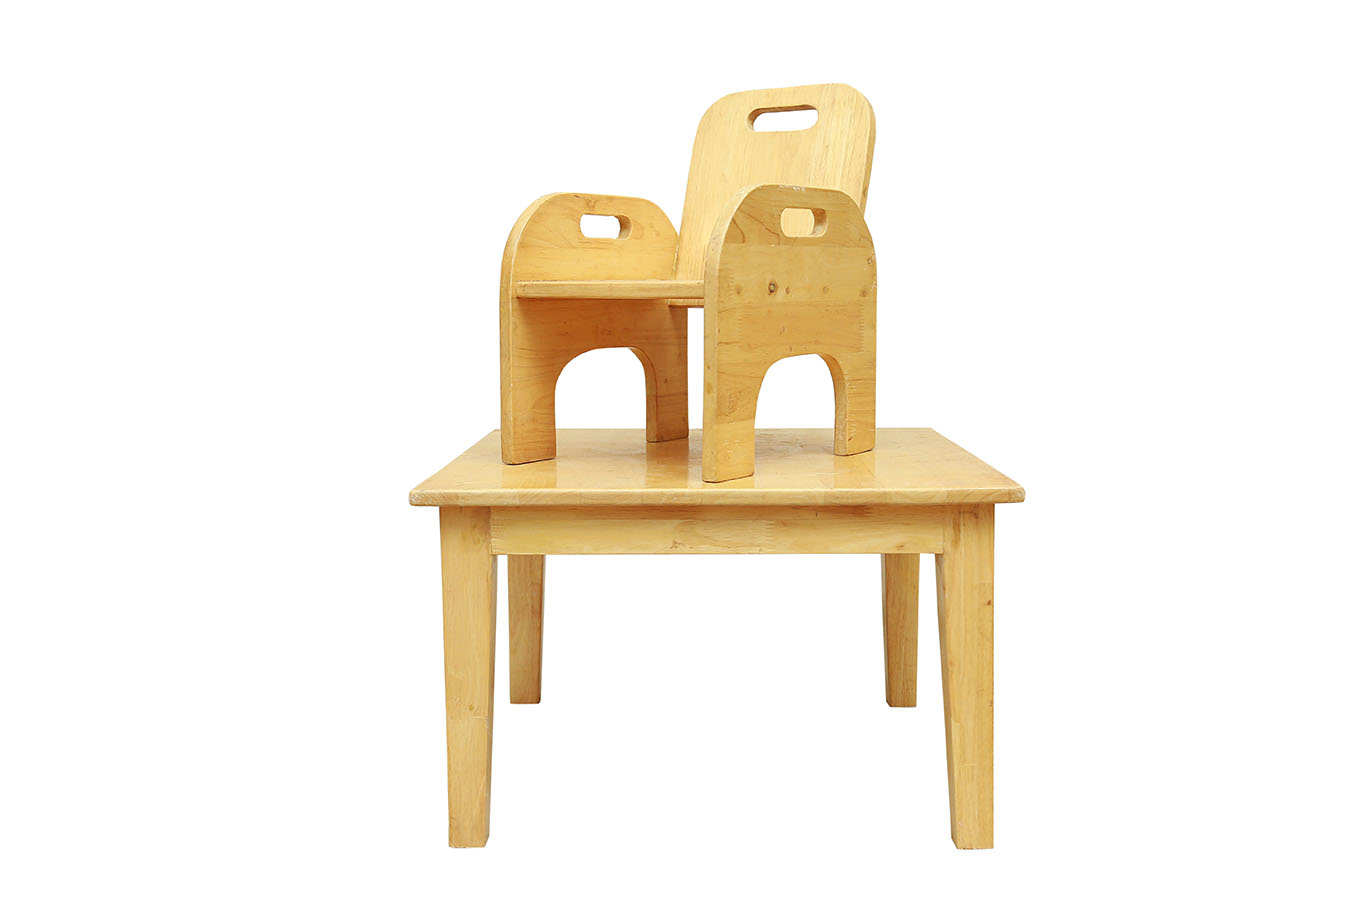 Weaning Table and Chair